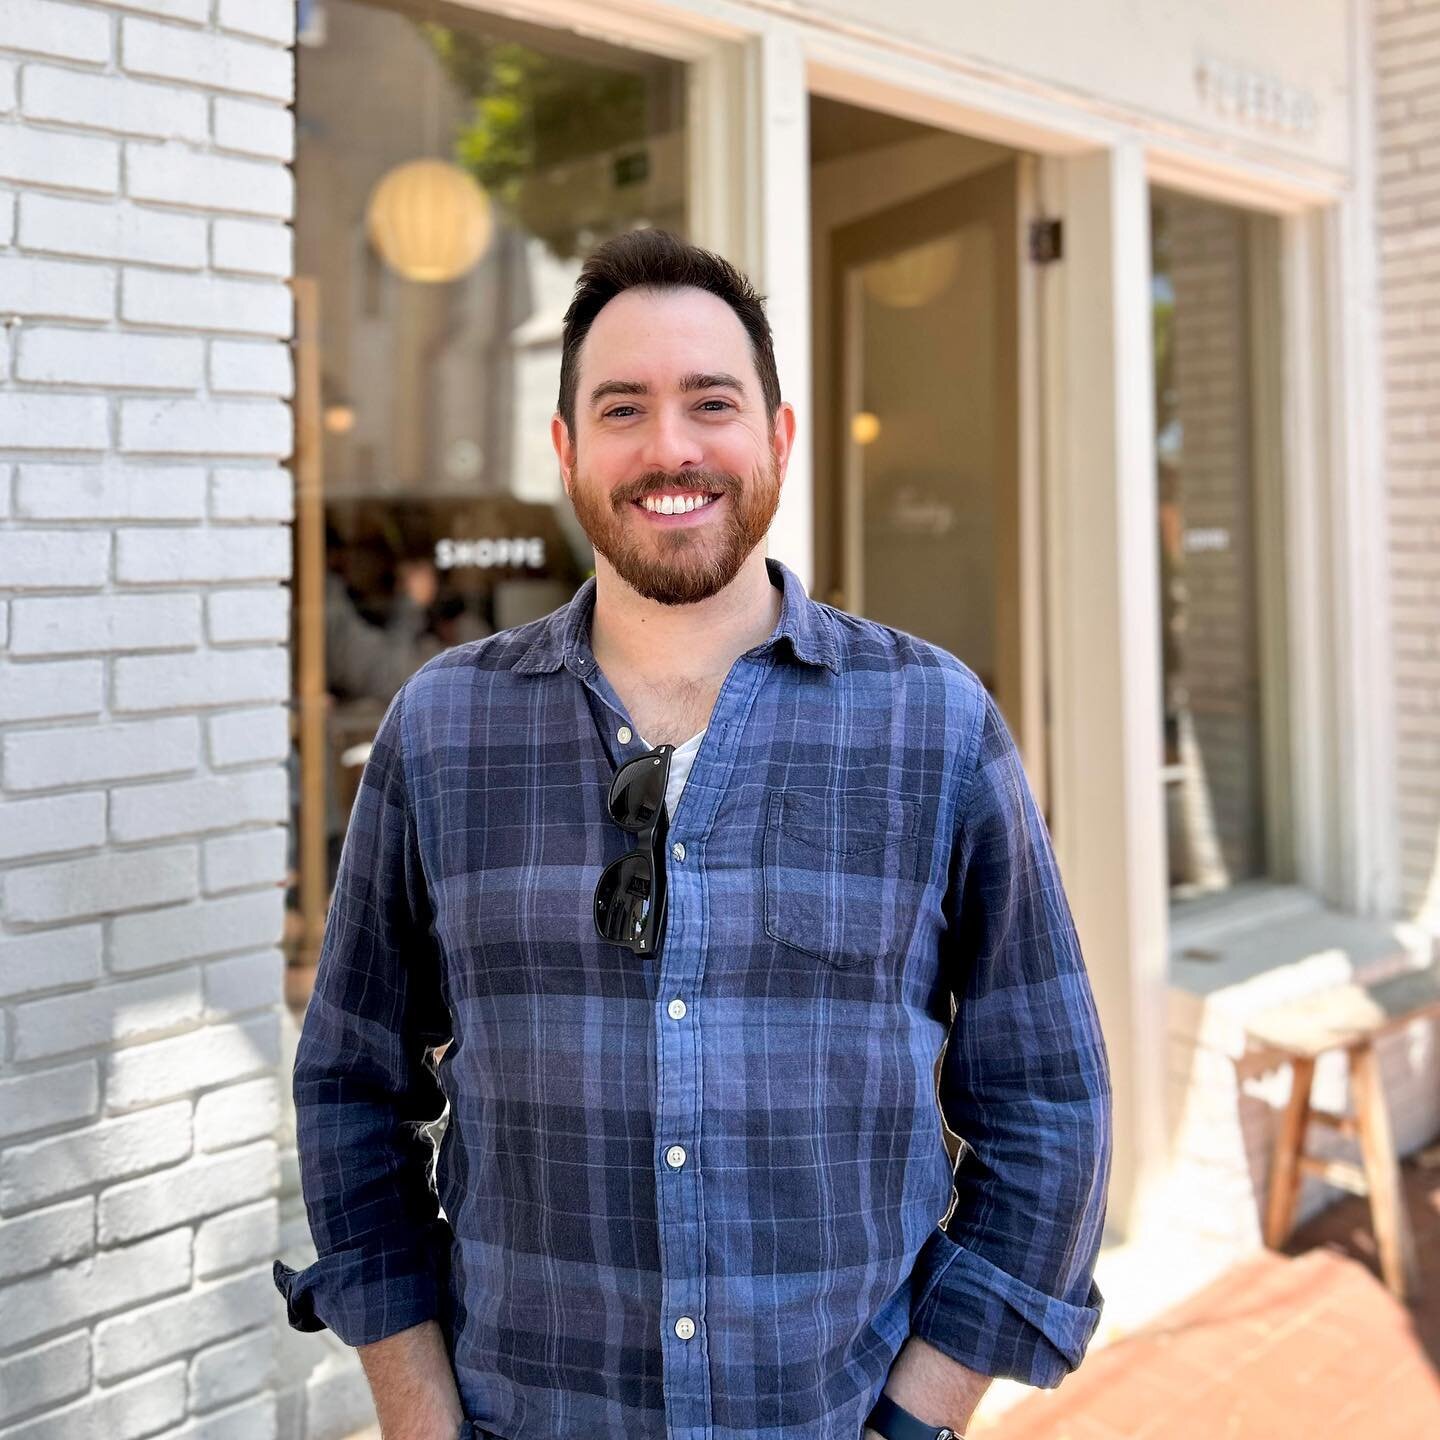 Celebrating one year with Brand Designer, Josh Leonard (JL) 🍷. Equal parts determination and iteration make Josh a 👌👊 conceptual designer. In his first year, Josh has participated in numerous signage projects, layout design exercises, render visua